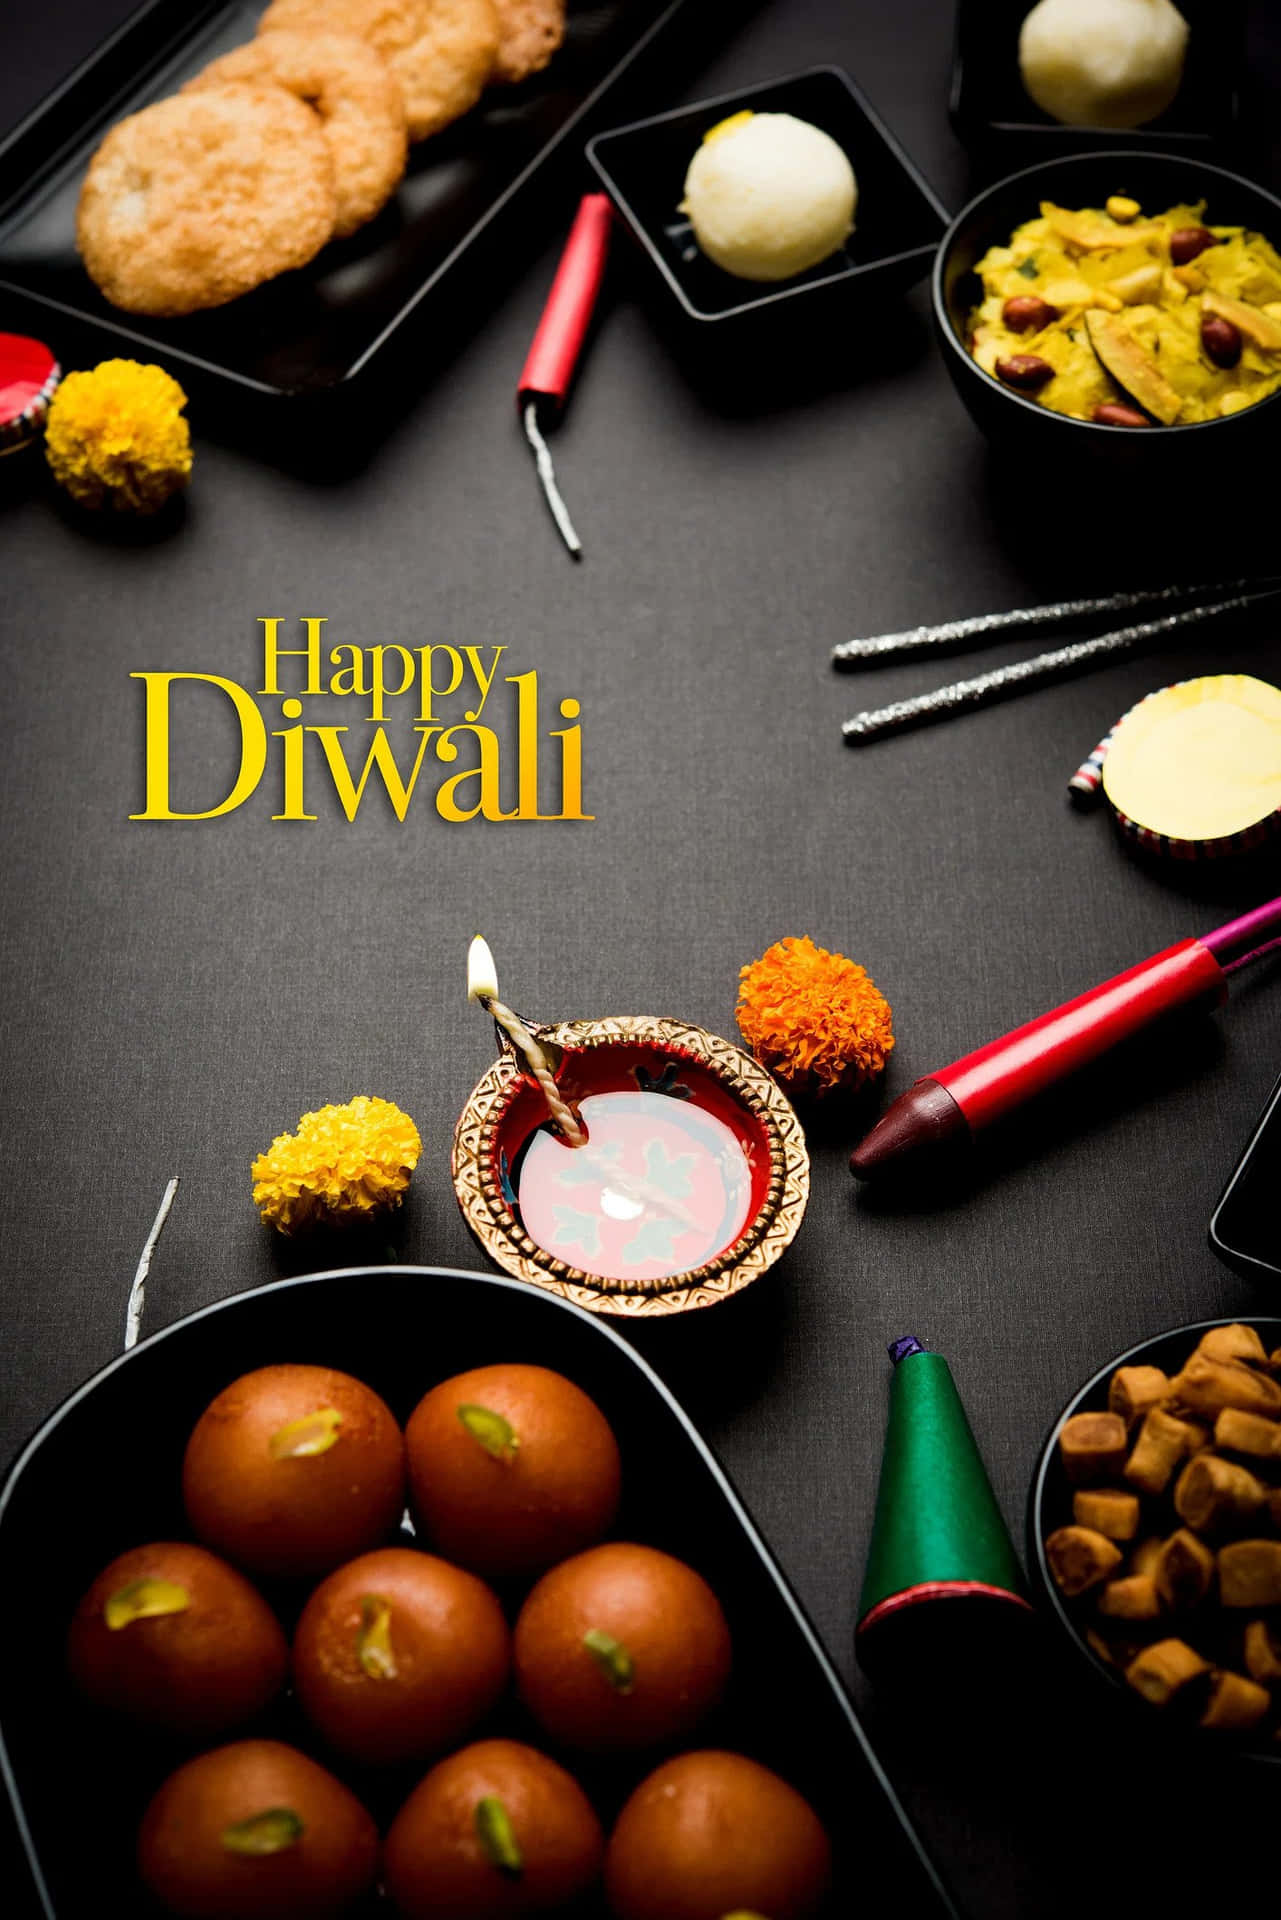 Wishing you joy and happiness on the festive occasion of Diwali